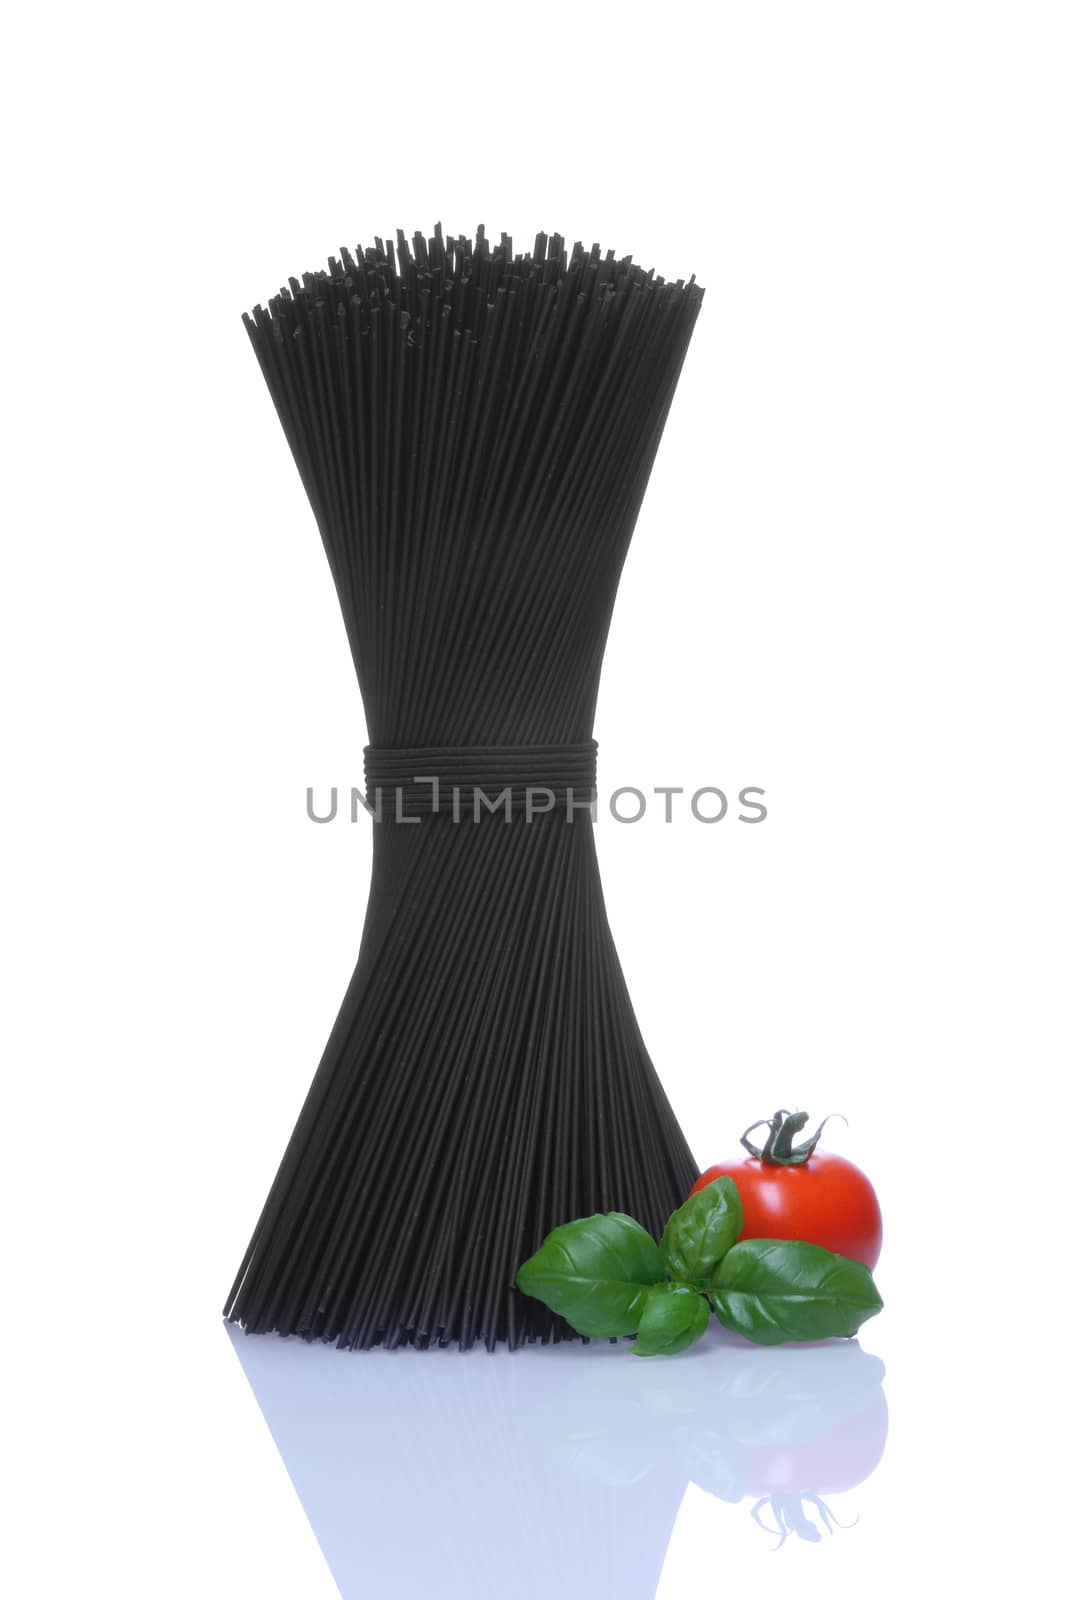 Black spaghetti with basel leaves and red tomato on white background.